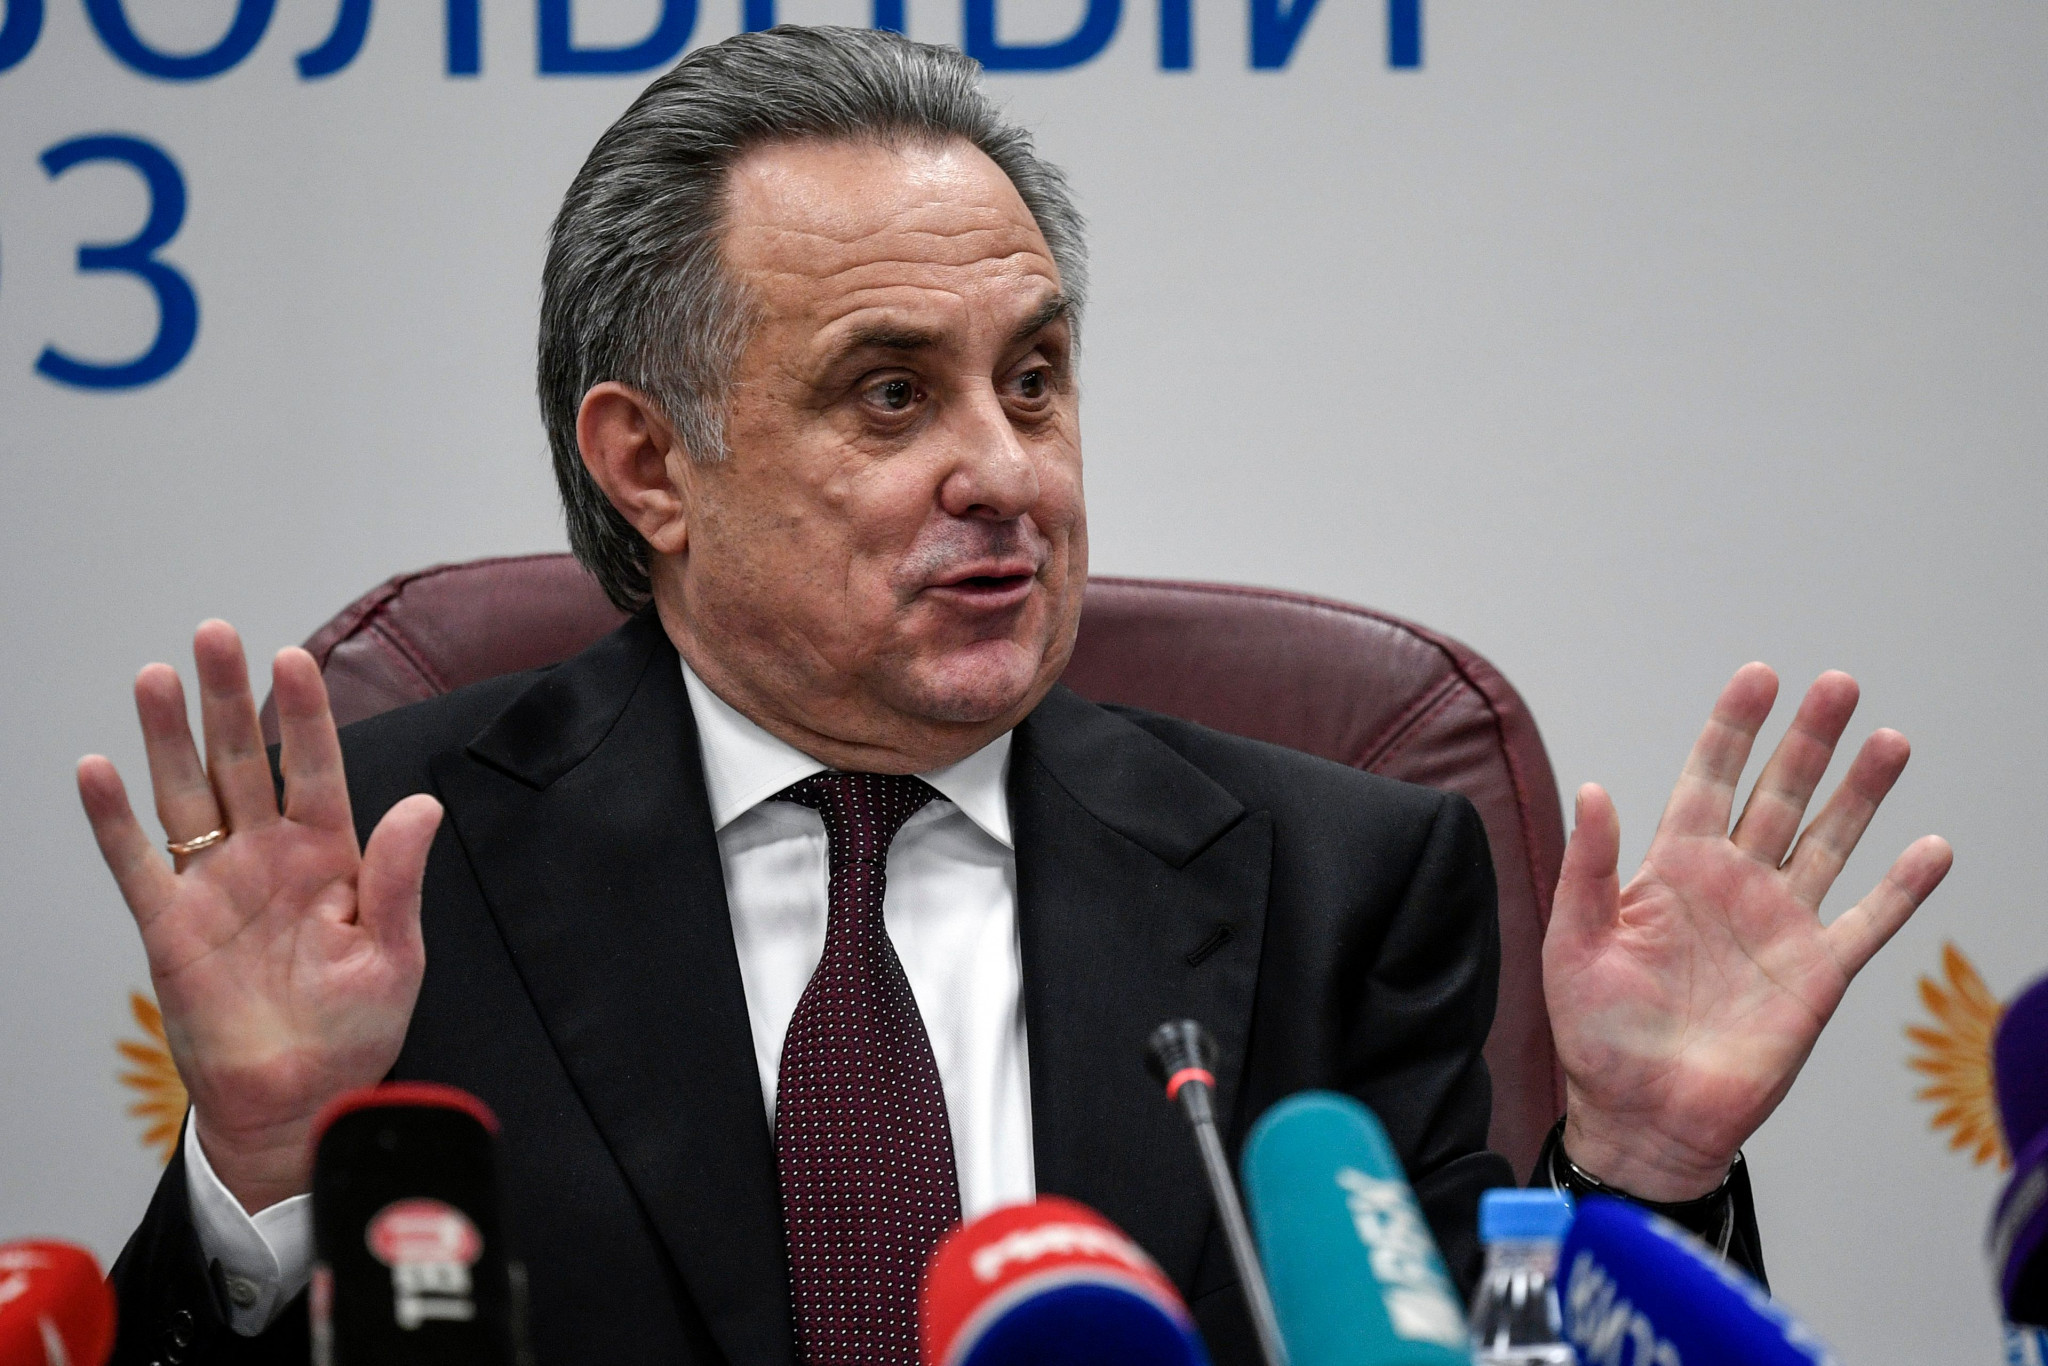 Vitaly Mutko has been defended by Vladimir Putin ©Getty Images